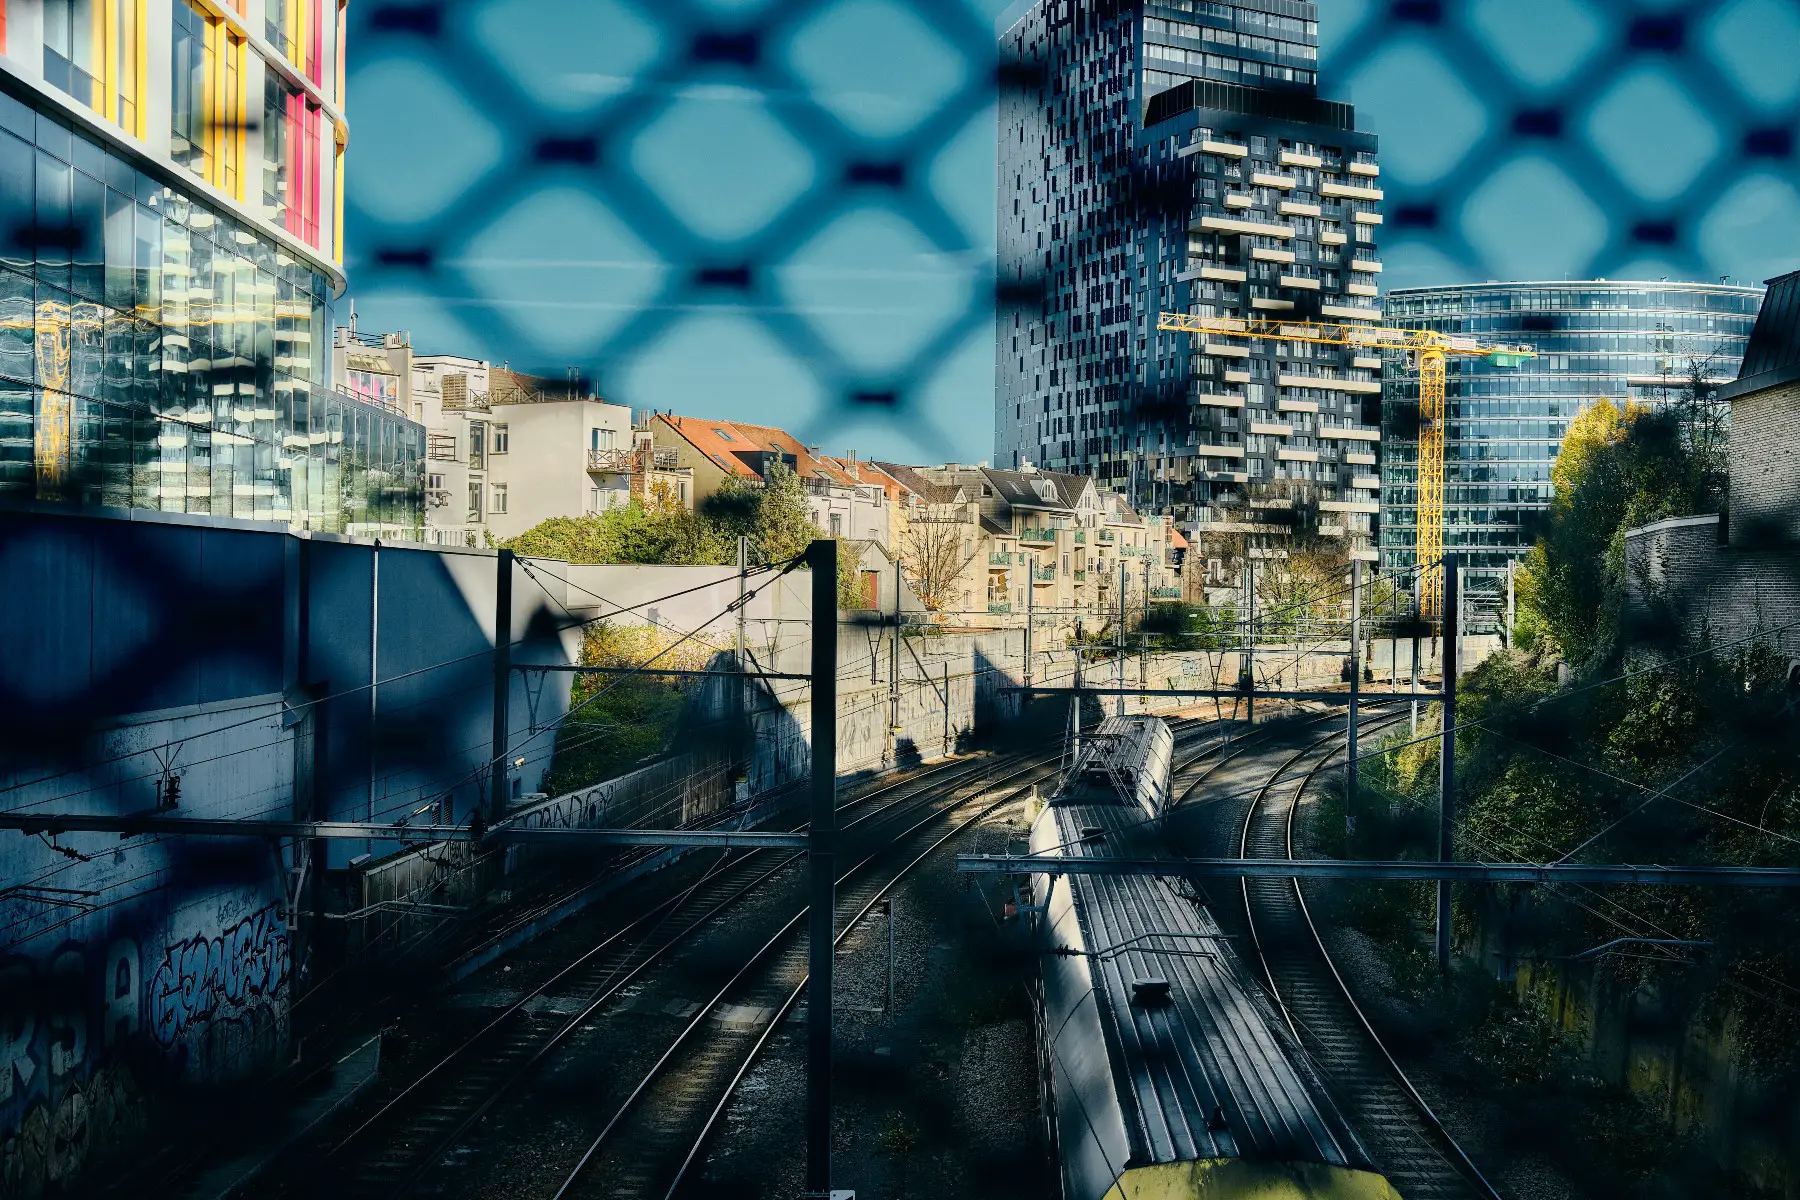 View of the train tracks at Station Brussel Schuman, Brussels, Belgium.